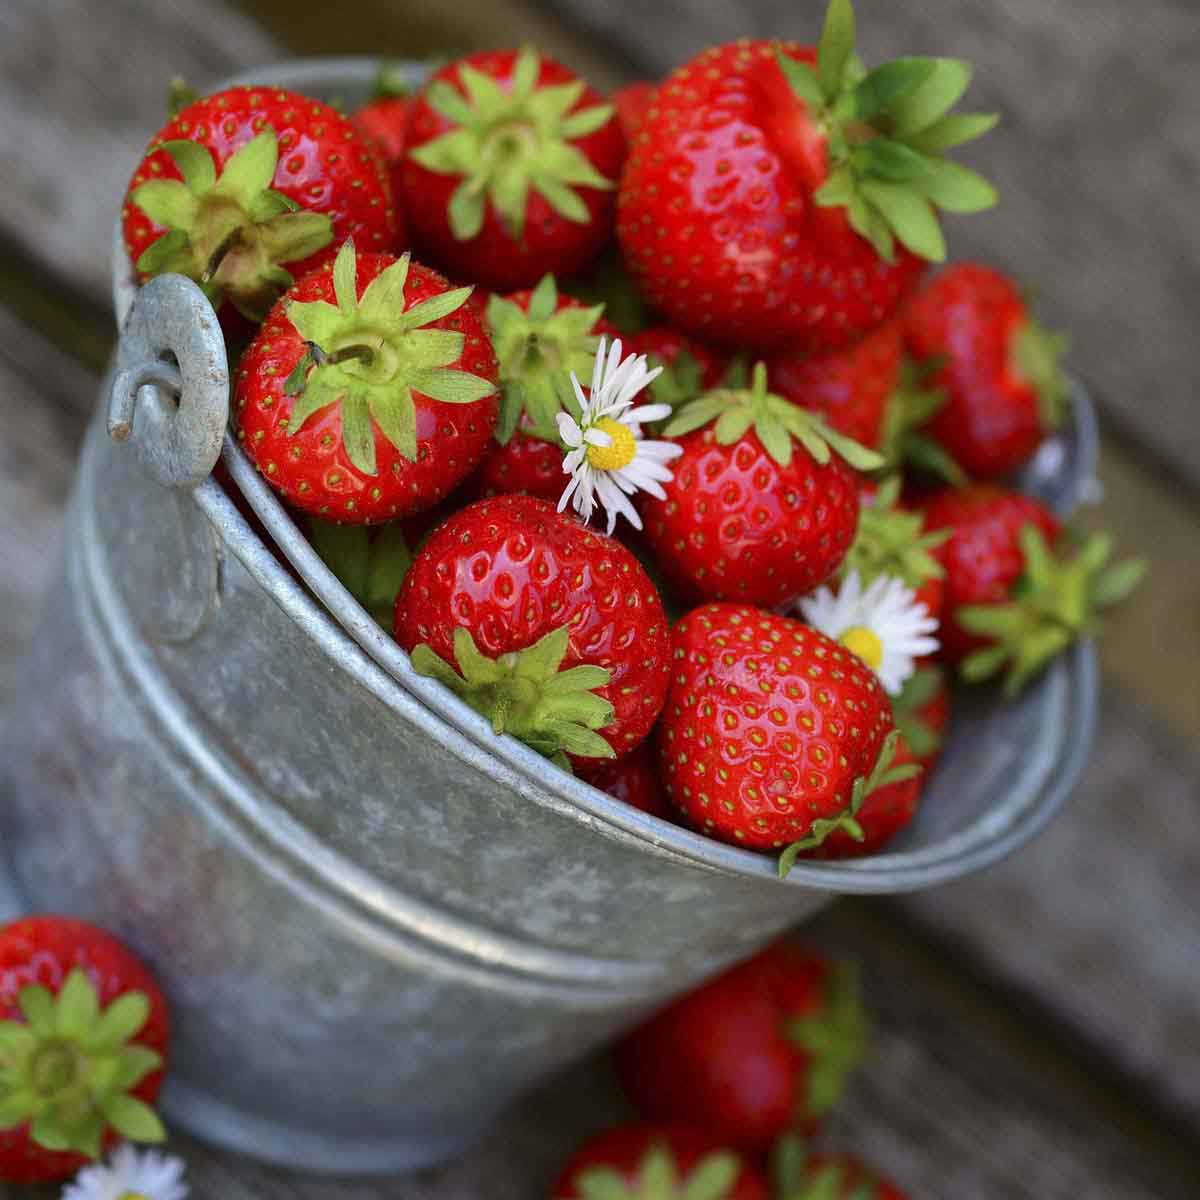 Bucket of large bright red strawberries.